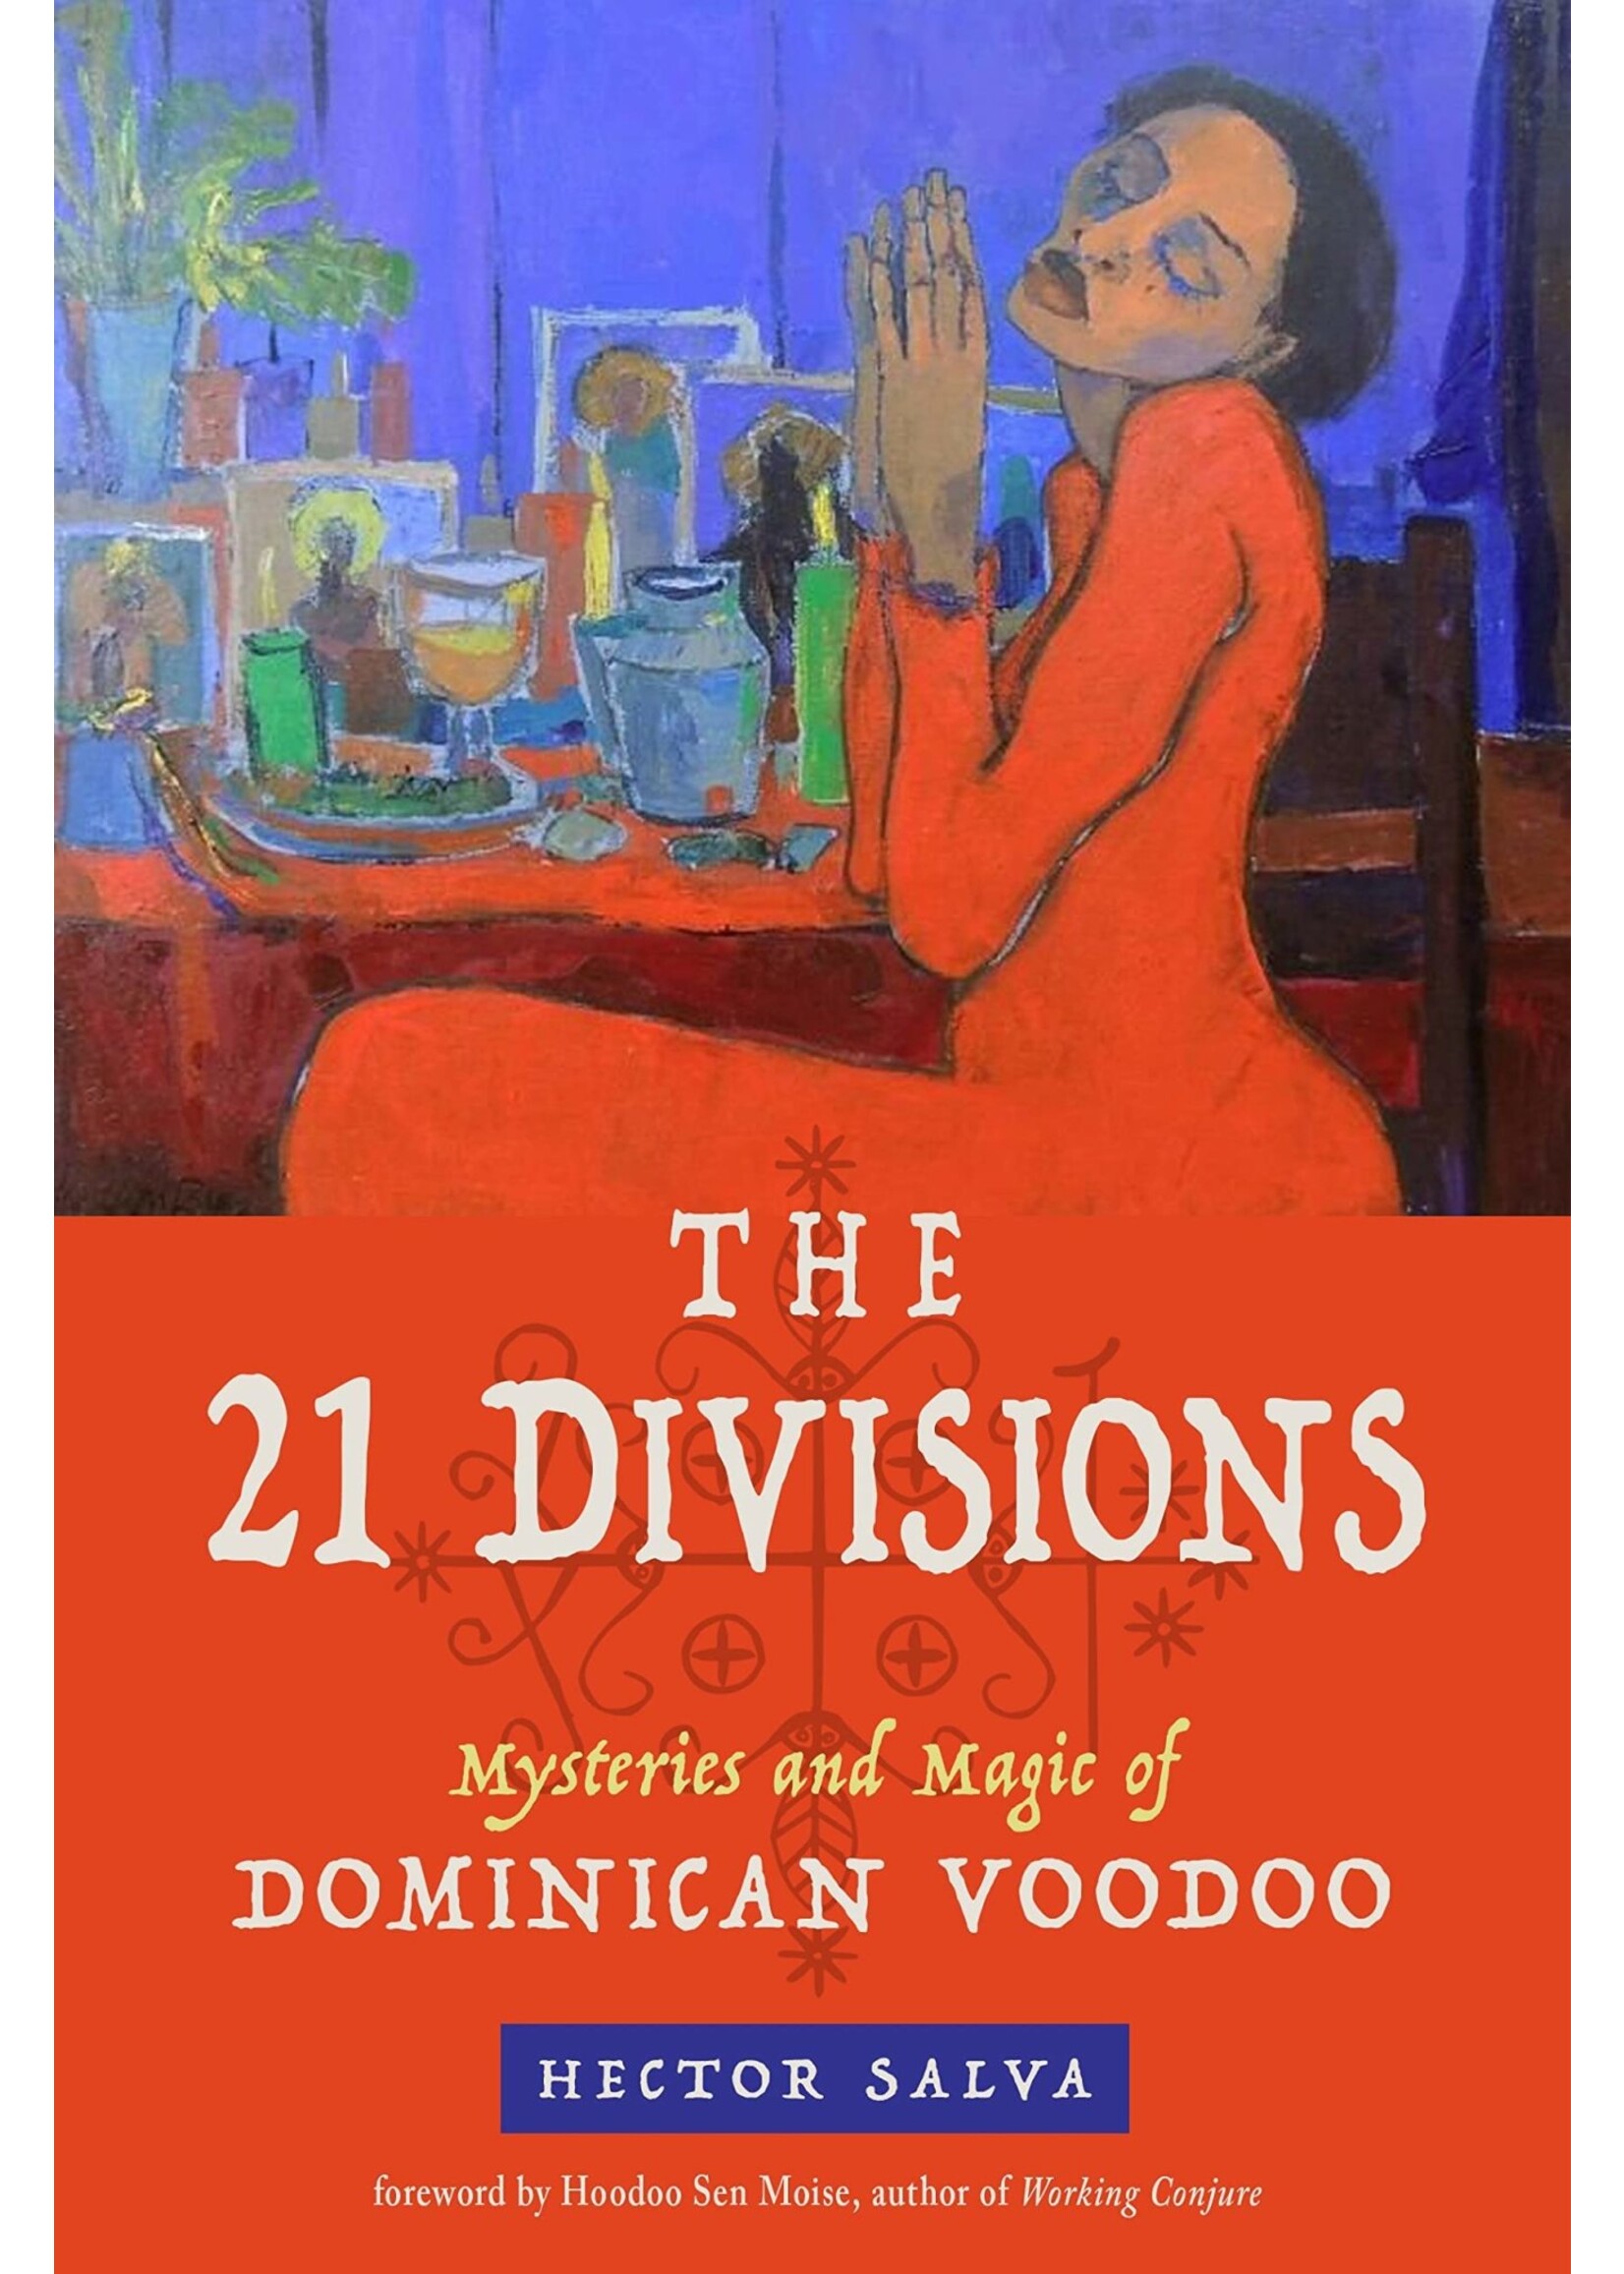 The 21 Divisions Mysteries and Magic of Dominican Voodoo